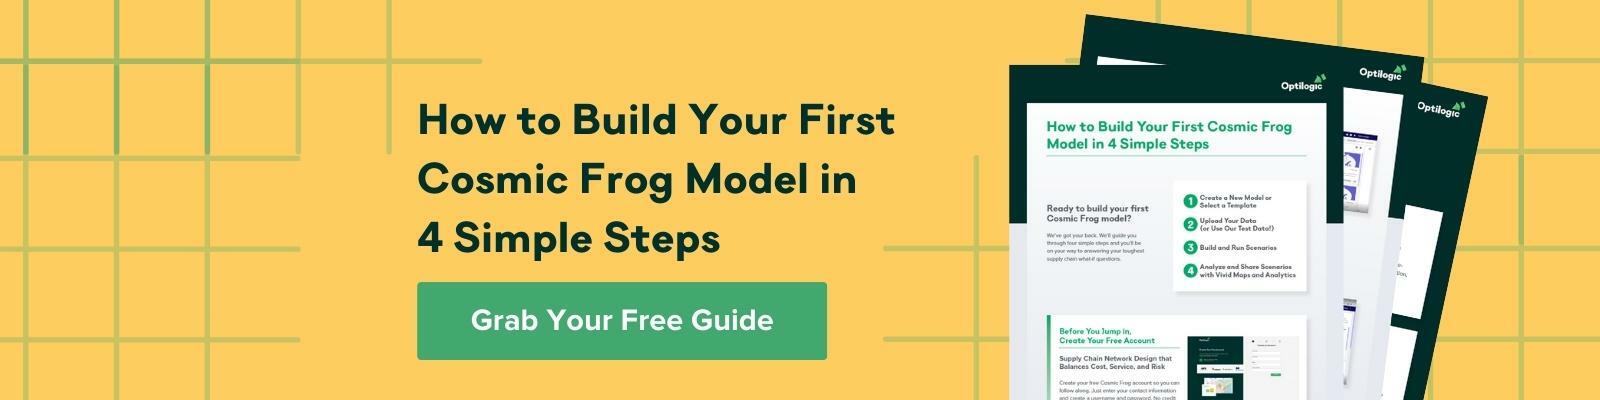 How to Build Your First Cosmic Frog Model in 4 Simple Steps CTA